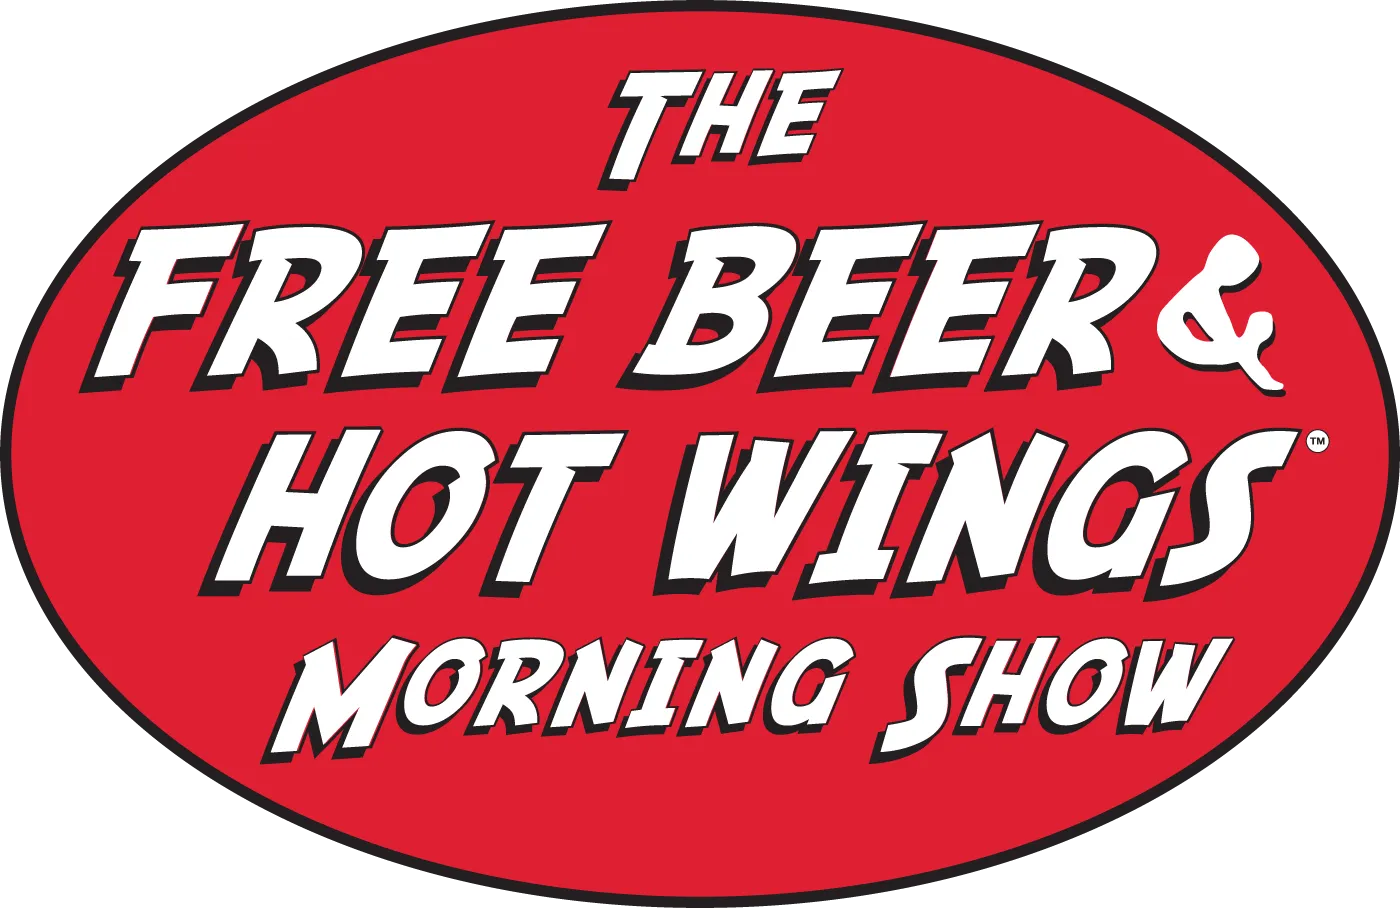 Free Beer and Hot Wings